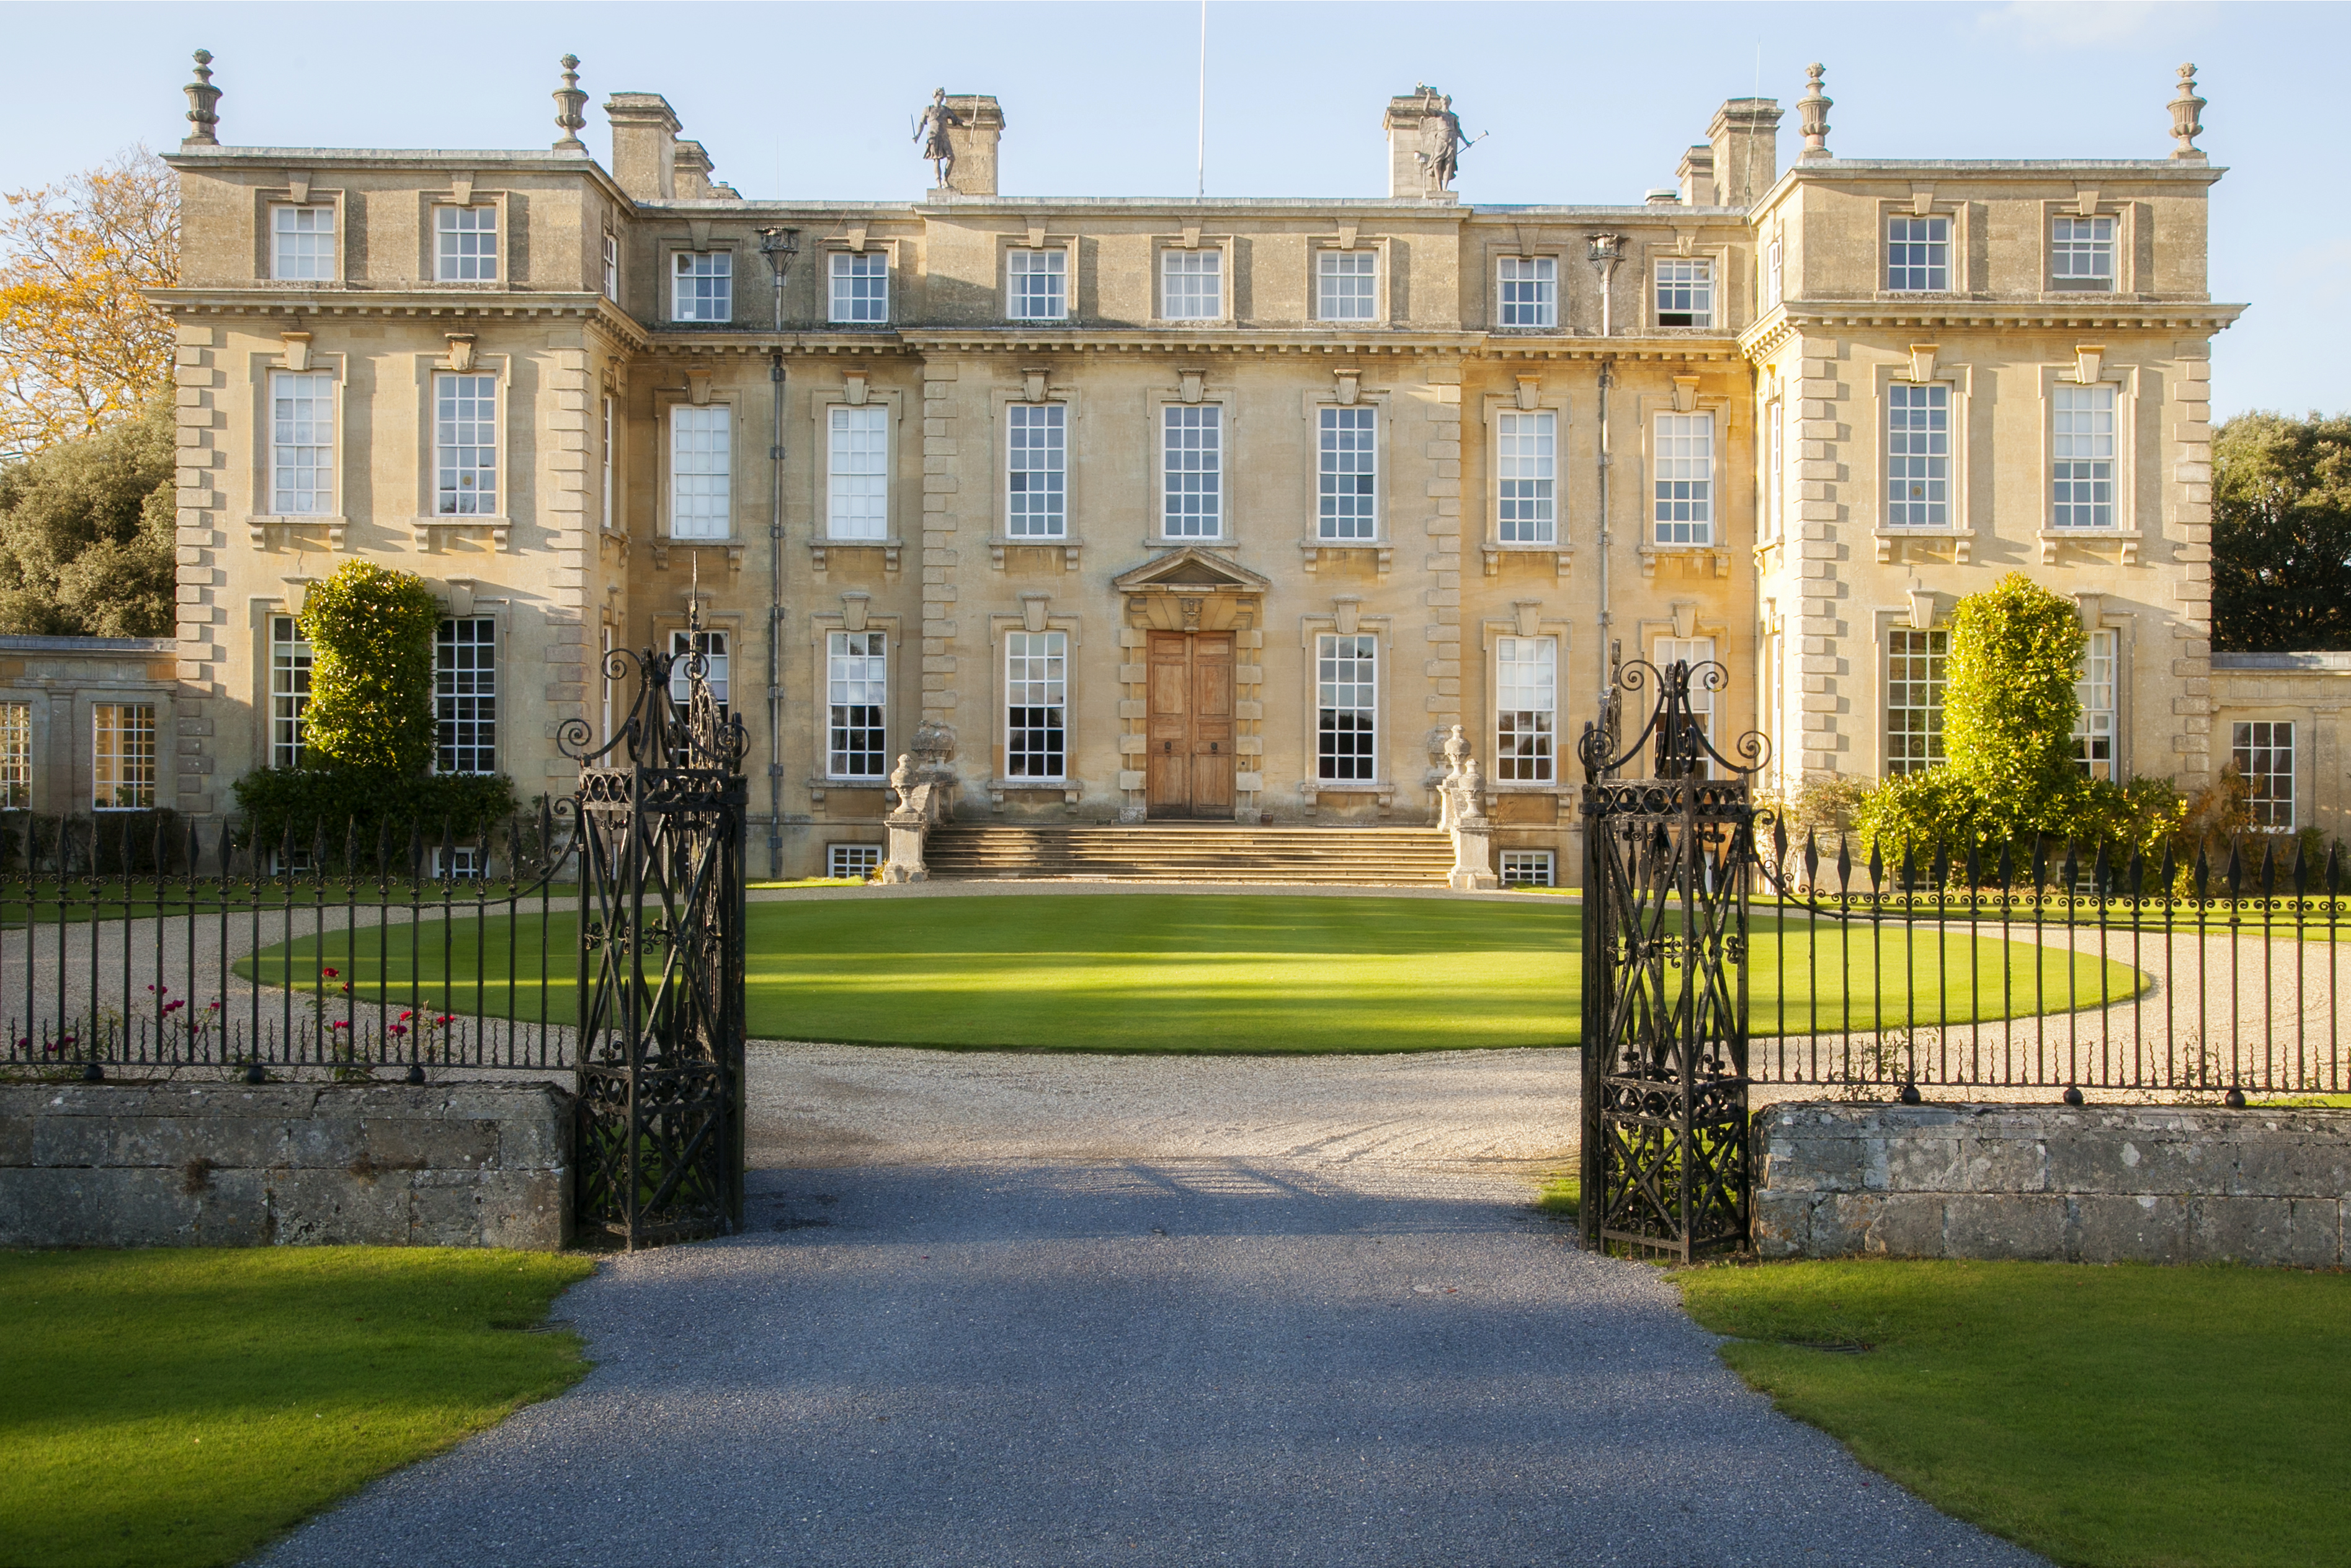 Ditchley Park, the mansion